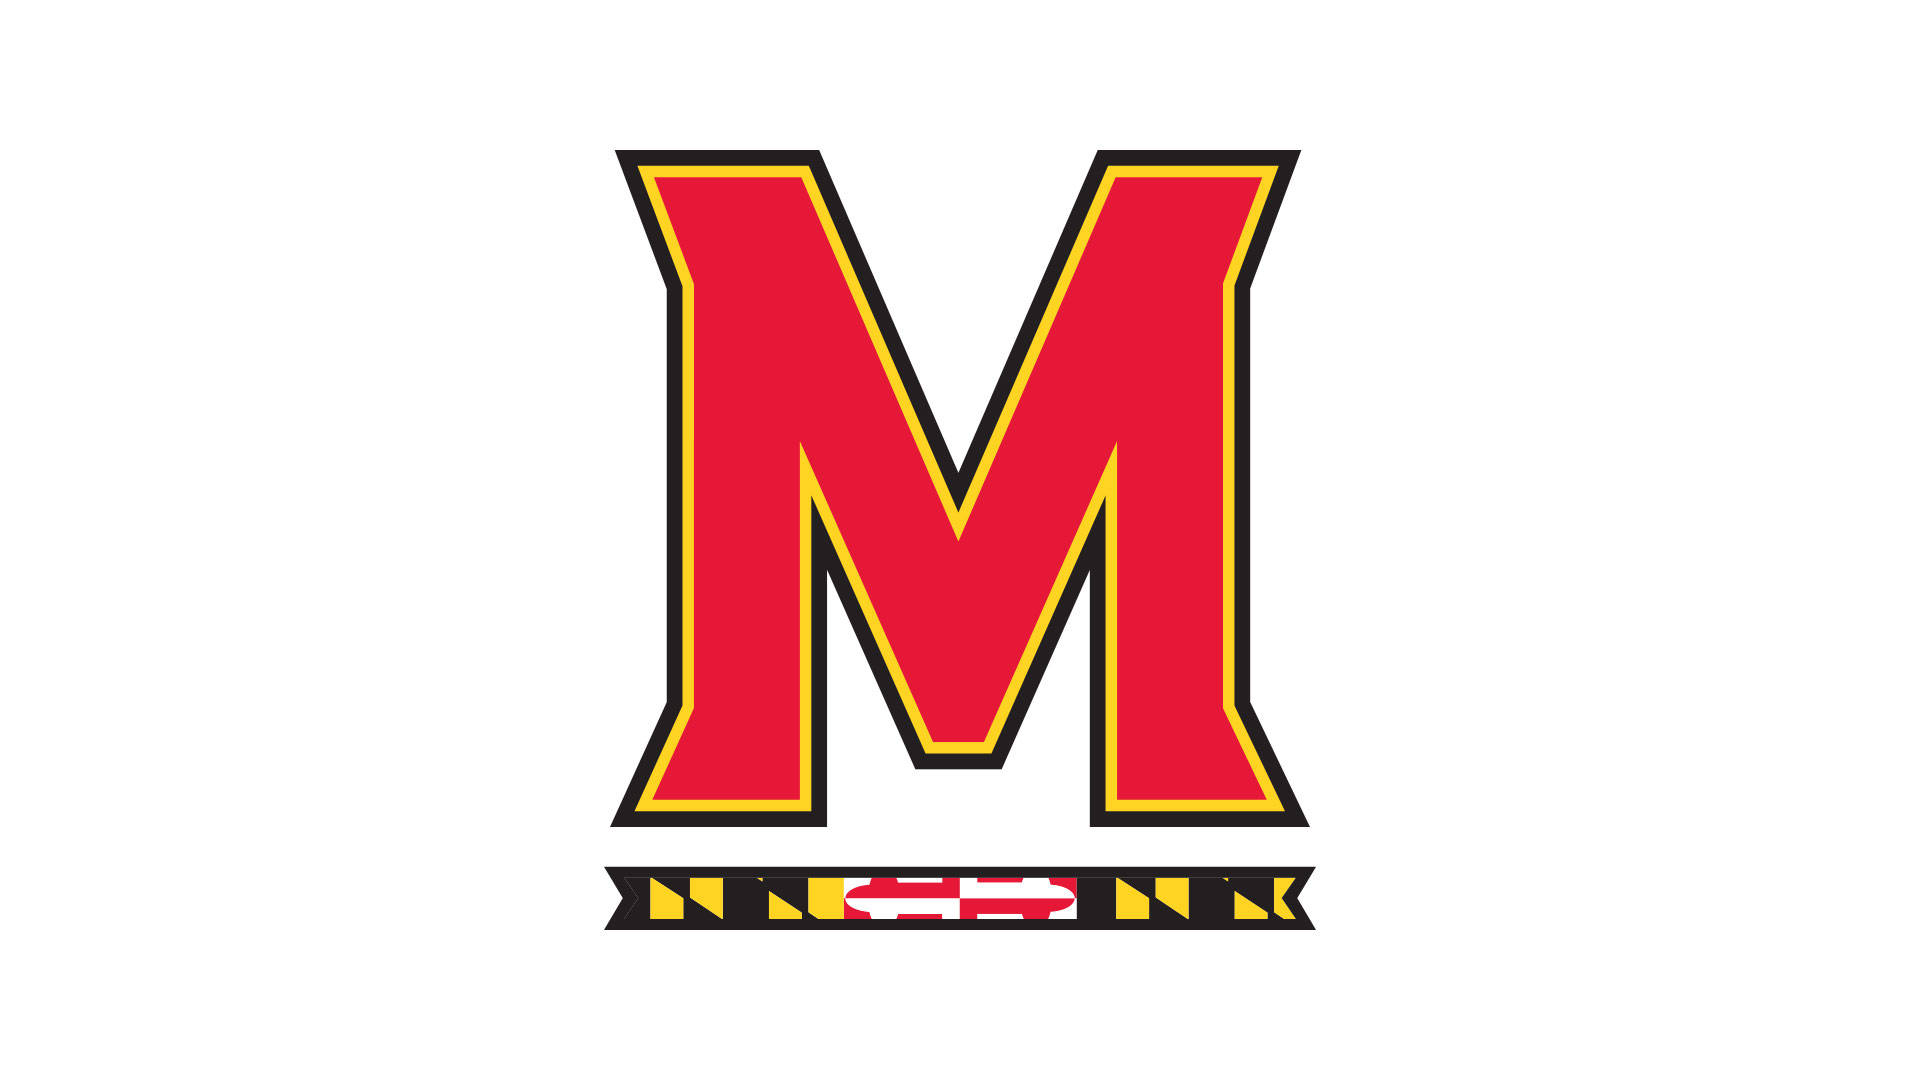 Download University Of Maryland Logo With Flag Wallpaper | Wallpapers.com